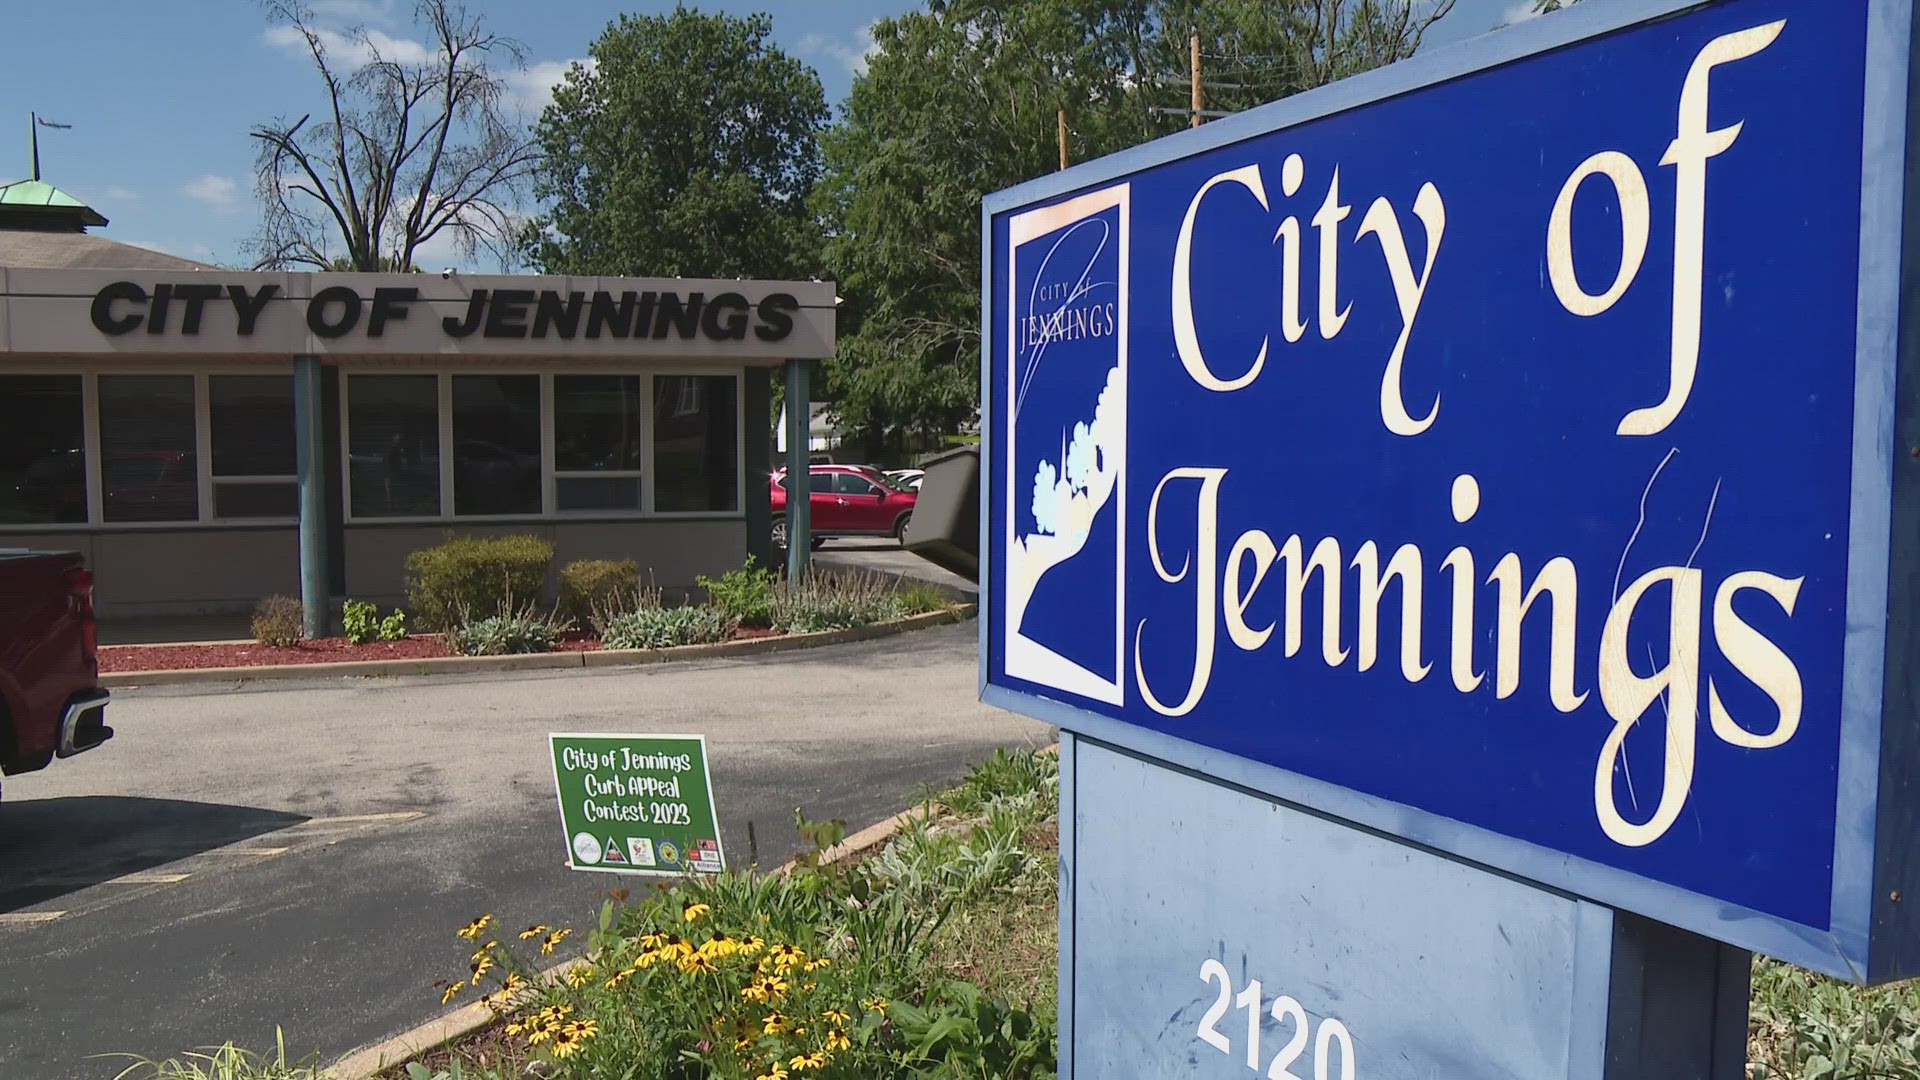 City of Jennings - Park and Recreations Department